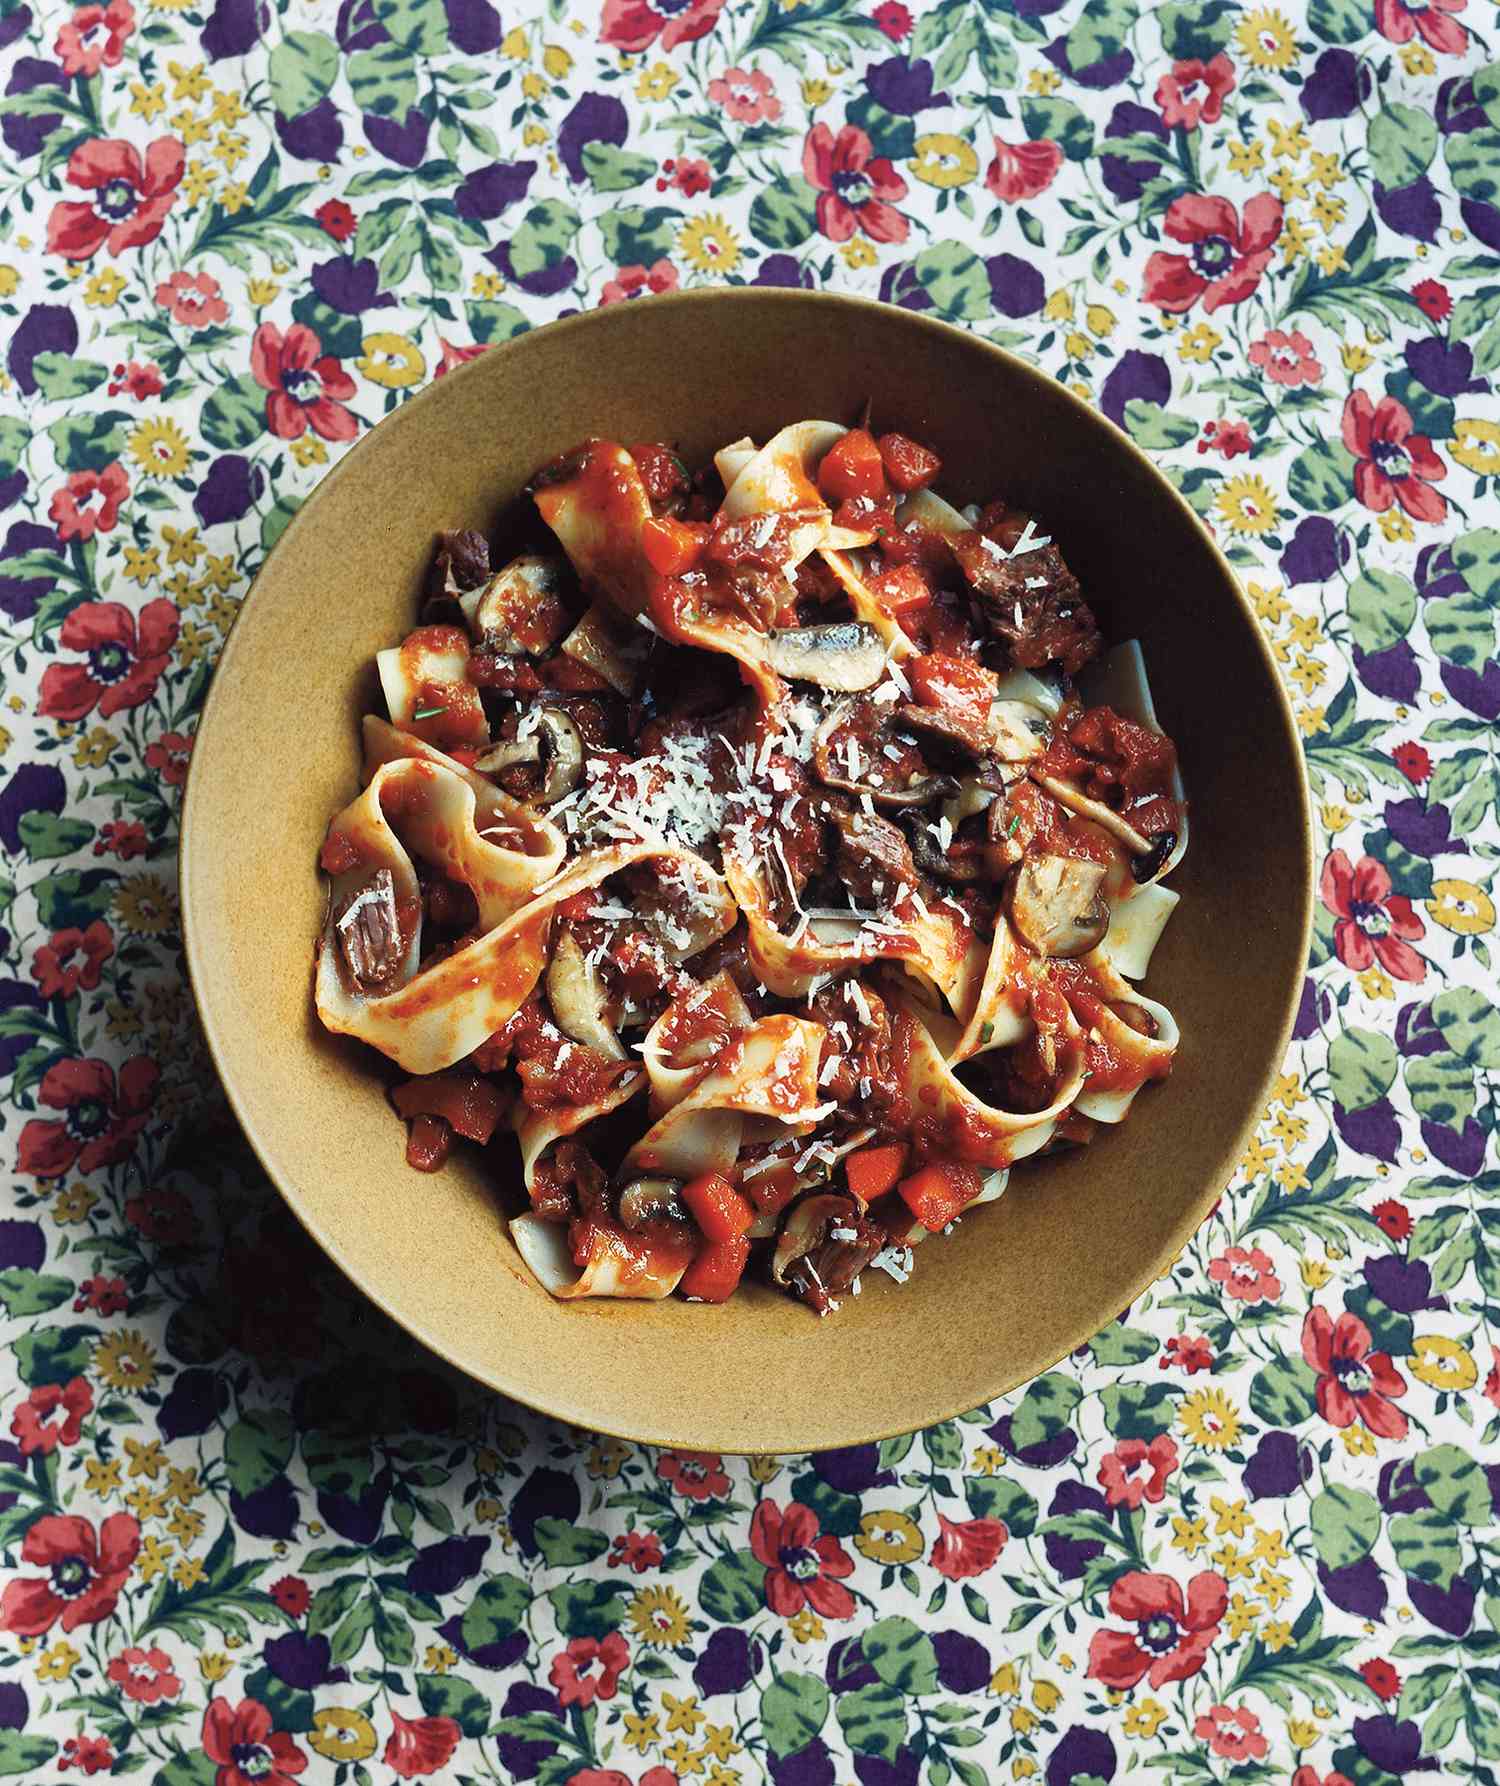 Pappardelle with beef and mushroom ragu